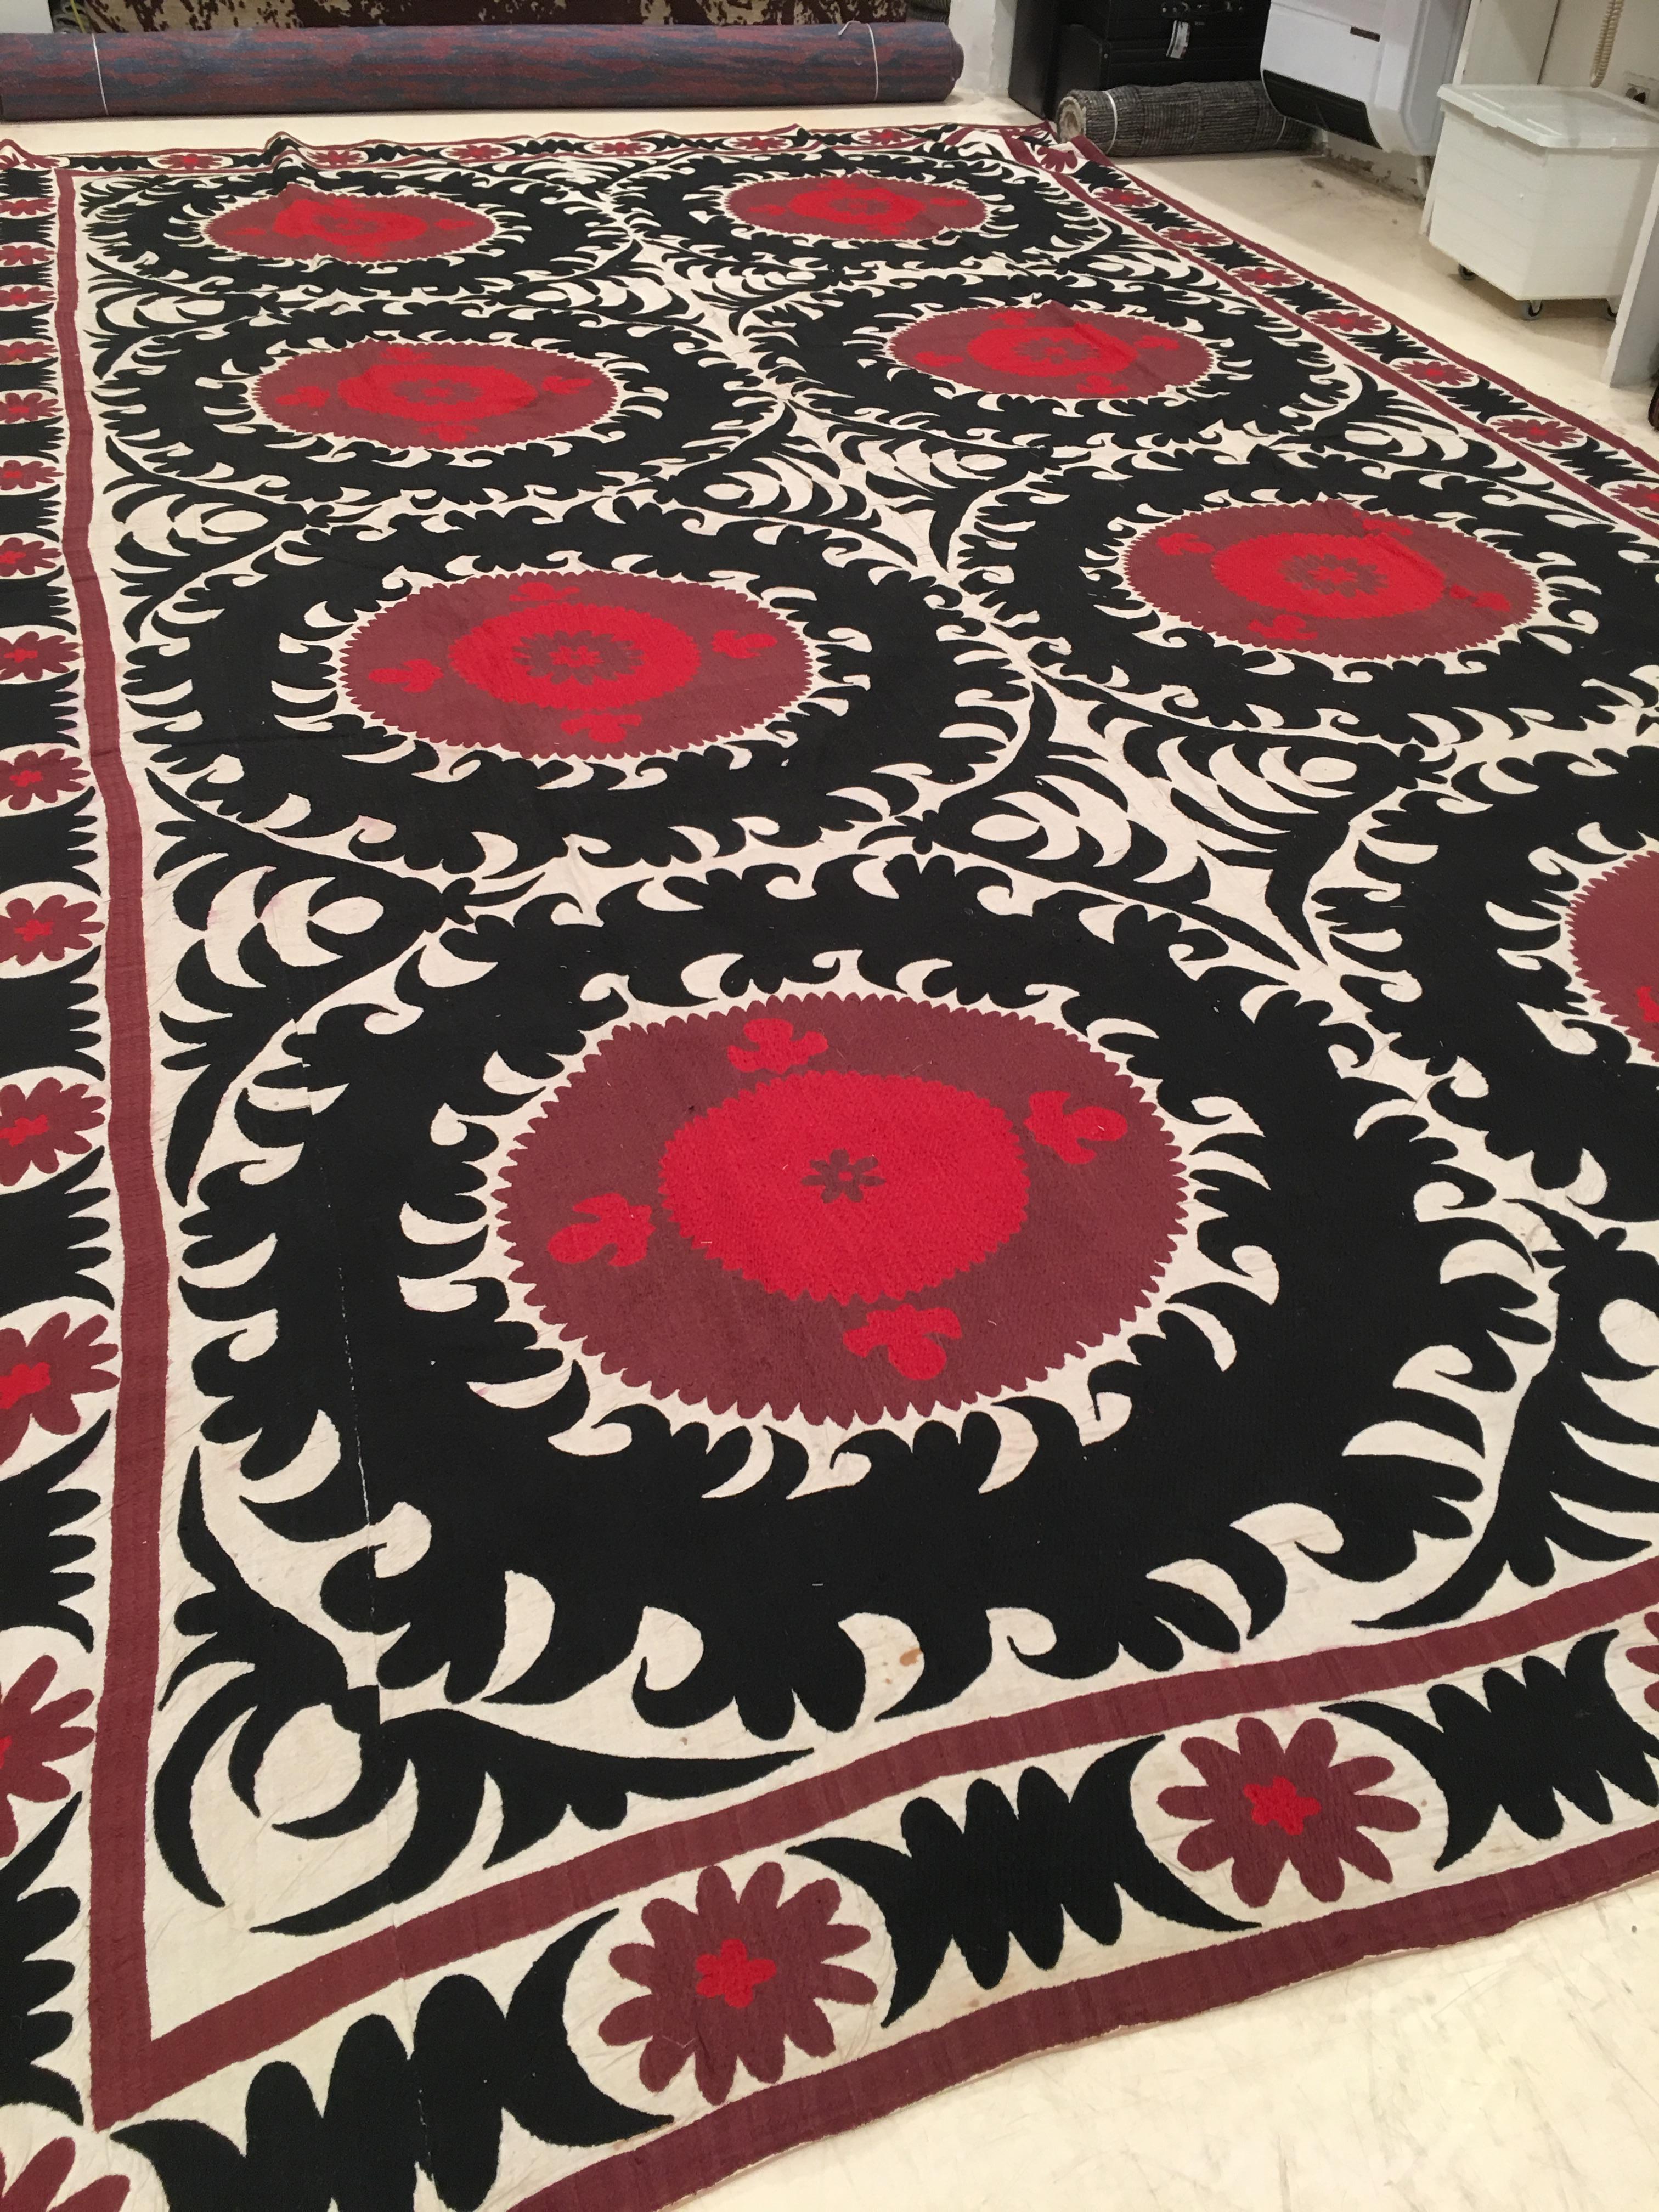 Cotton Vintage Central Asian Oversized Silk Suzani Embroidered Rug For Sale